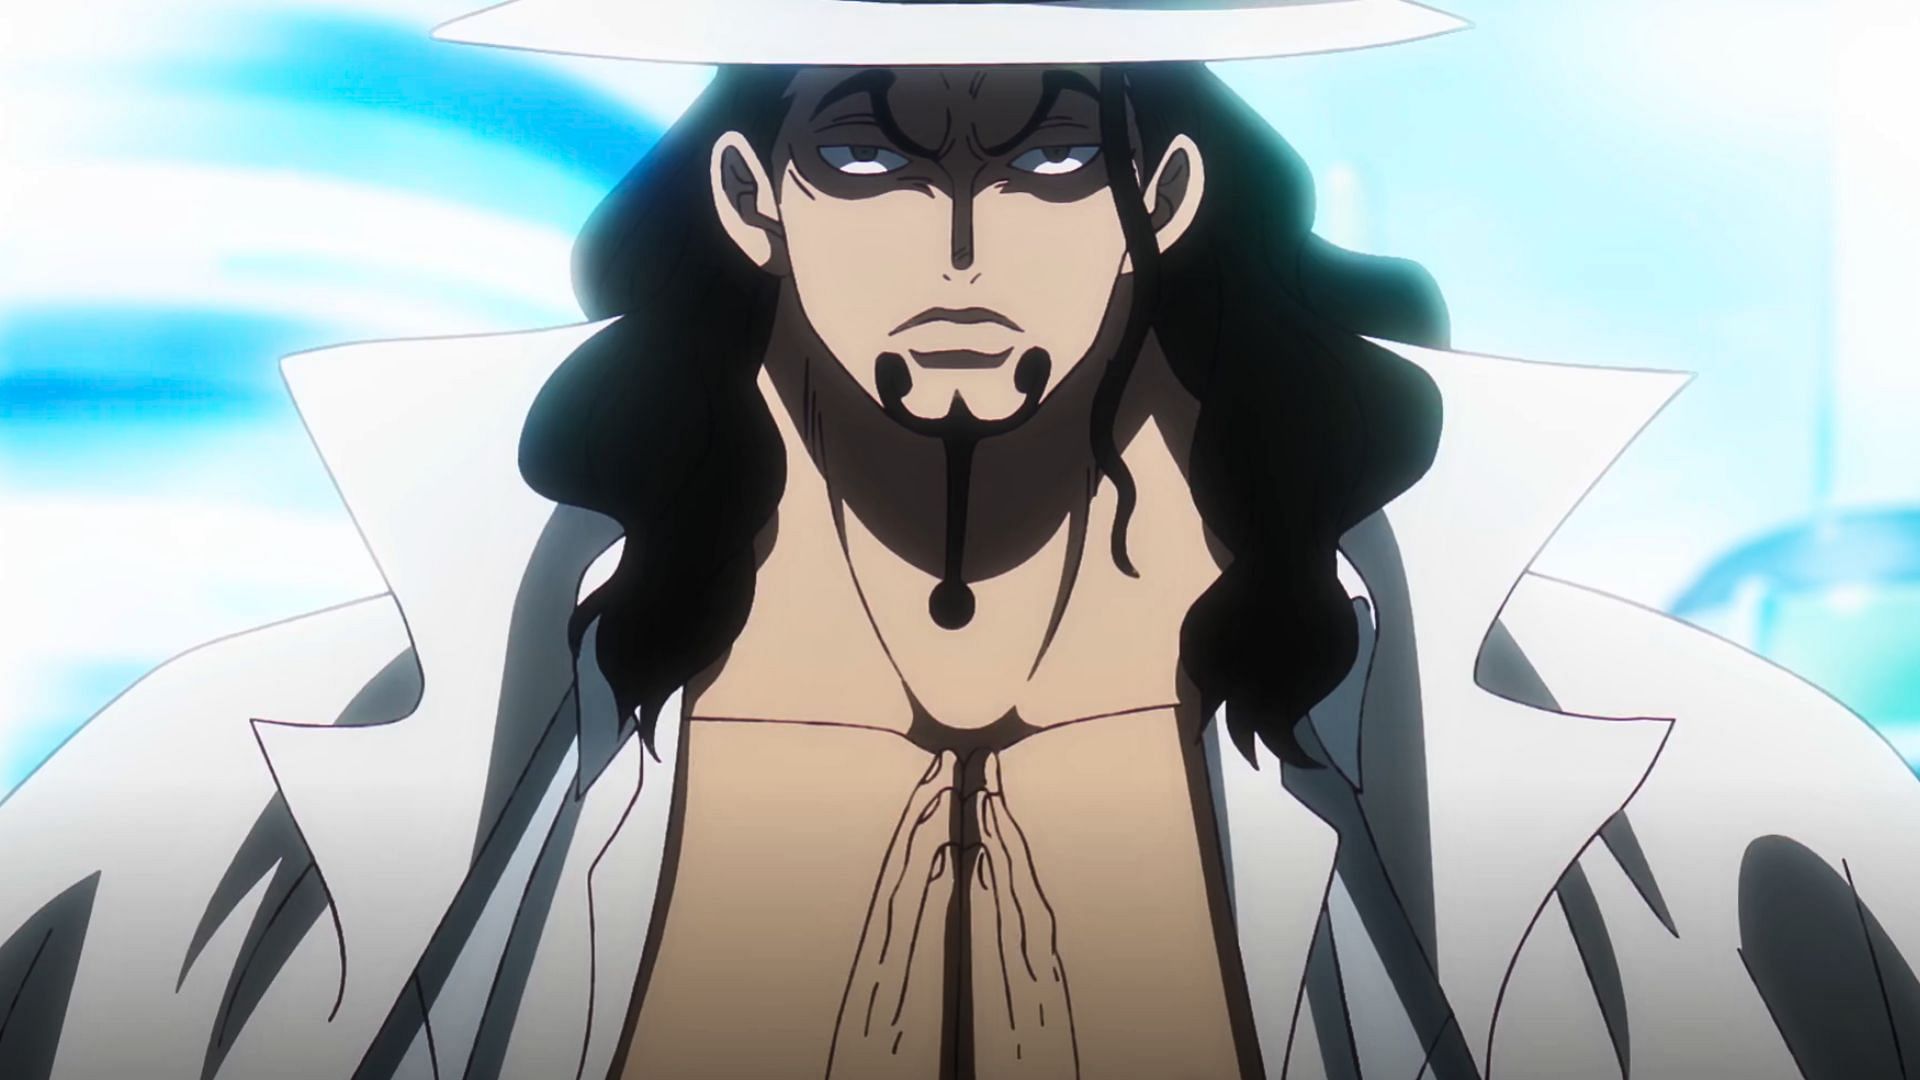 Rob Lucci as seen in the One Piece episode 1099 (Image via Toei)